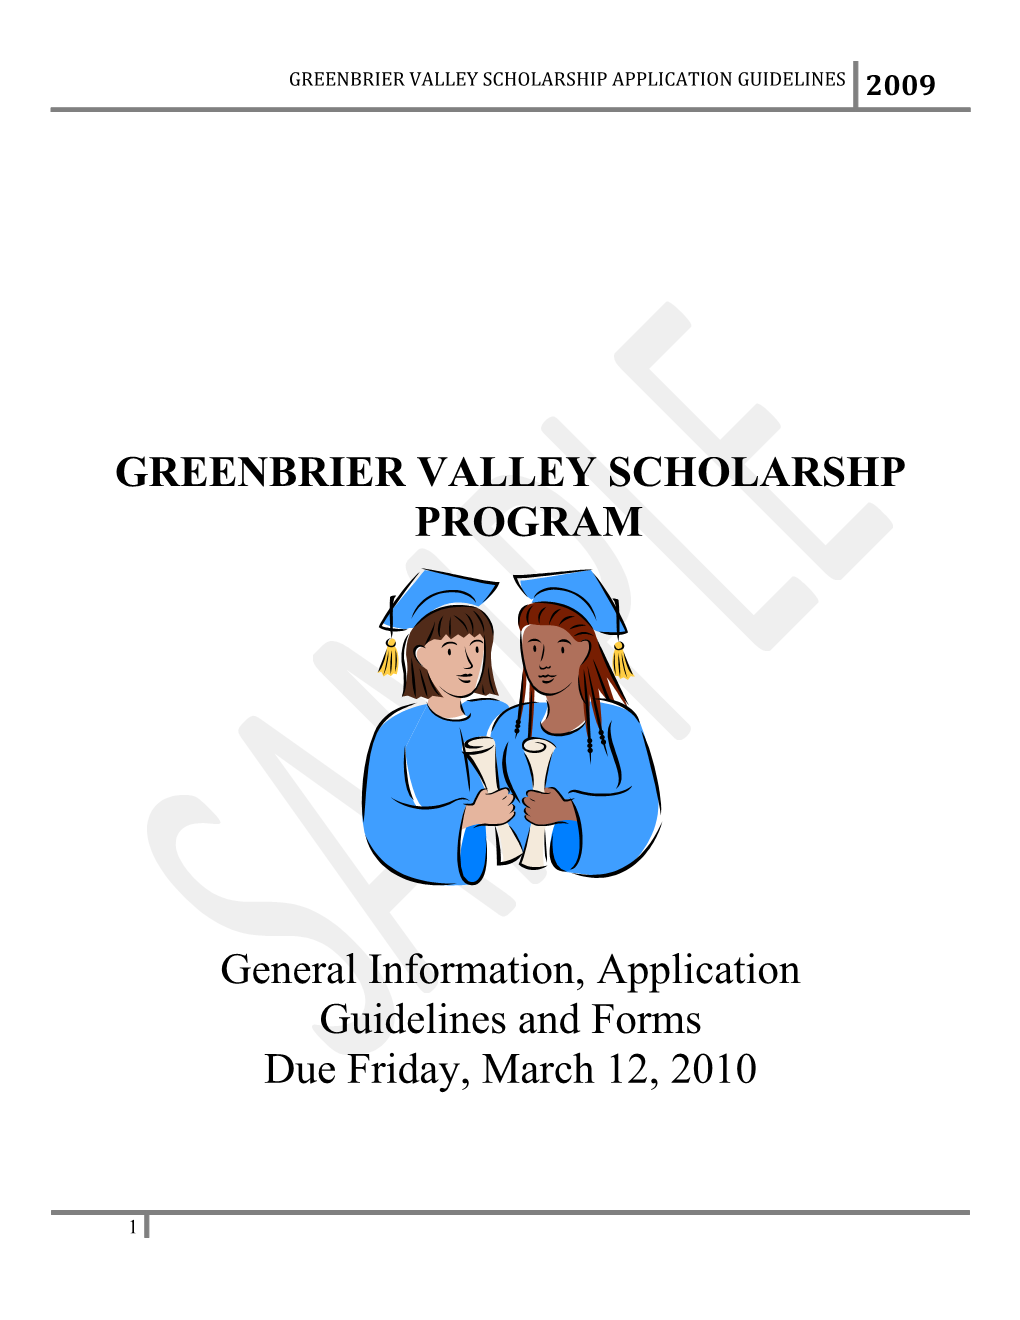 Greenbrier Valley Scholarship Application Guidelines